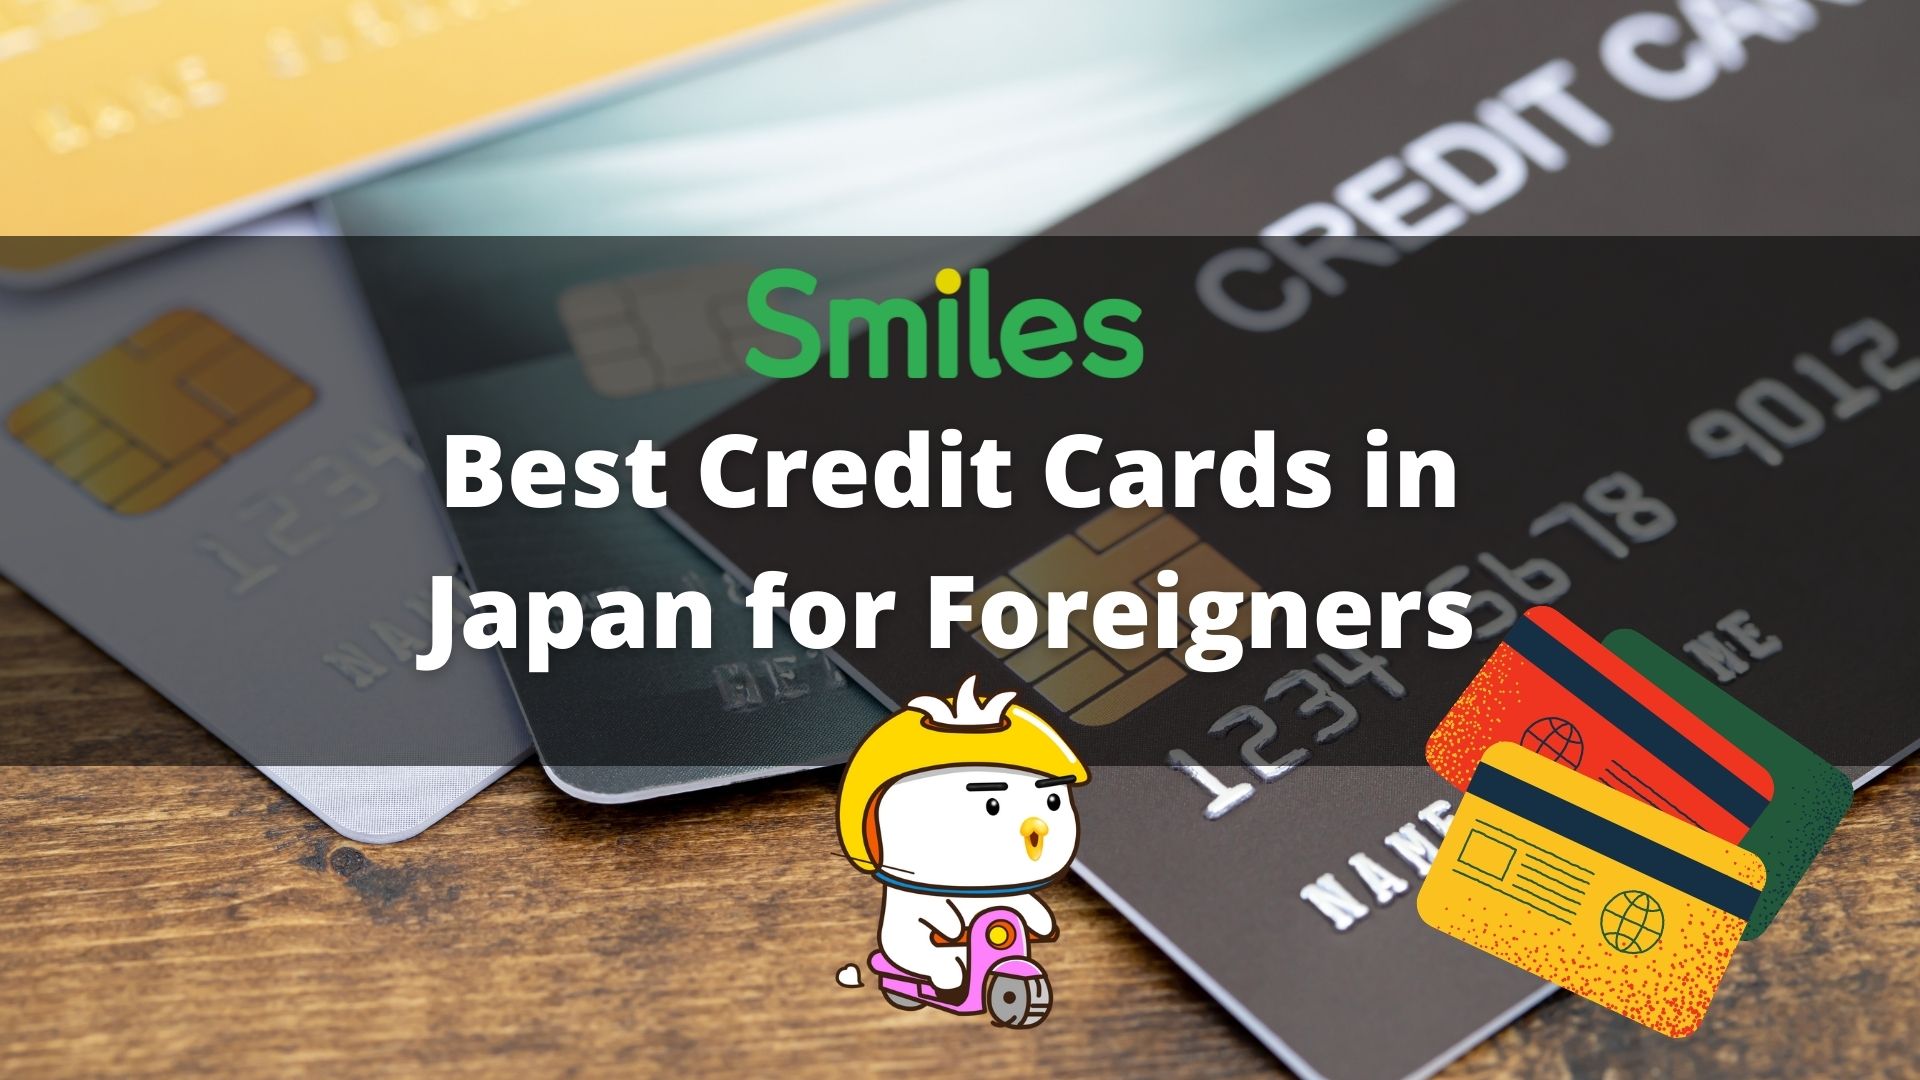 The condition for a foreigner to issue a credit card is that he/she must be a special permanent resident or a medium- to long-term resident. This is because an ID card is required to create a credit card in Japan.